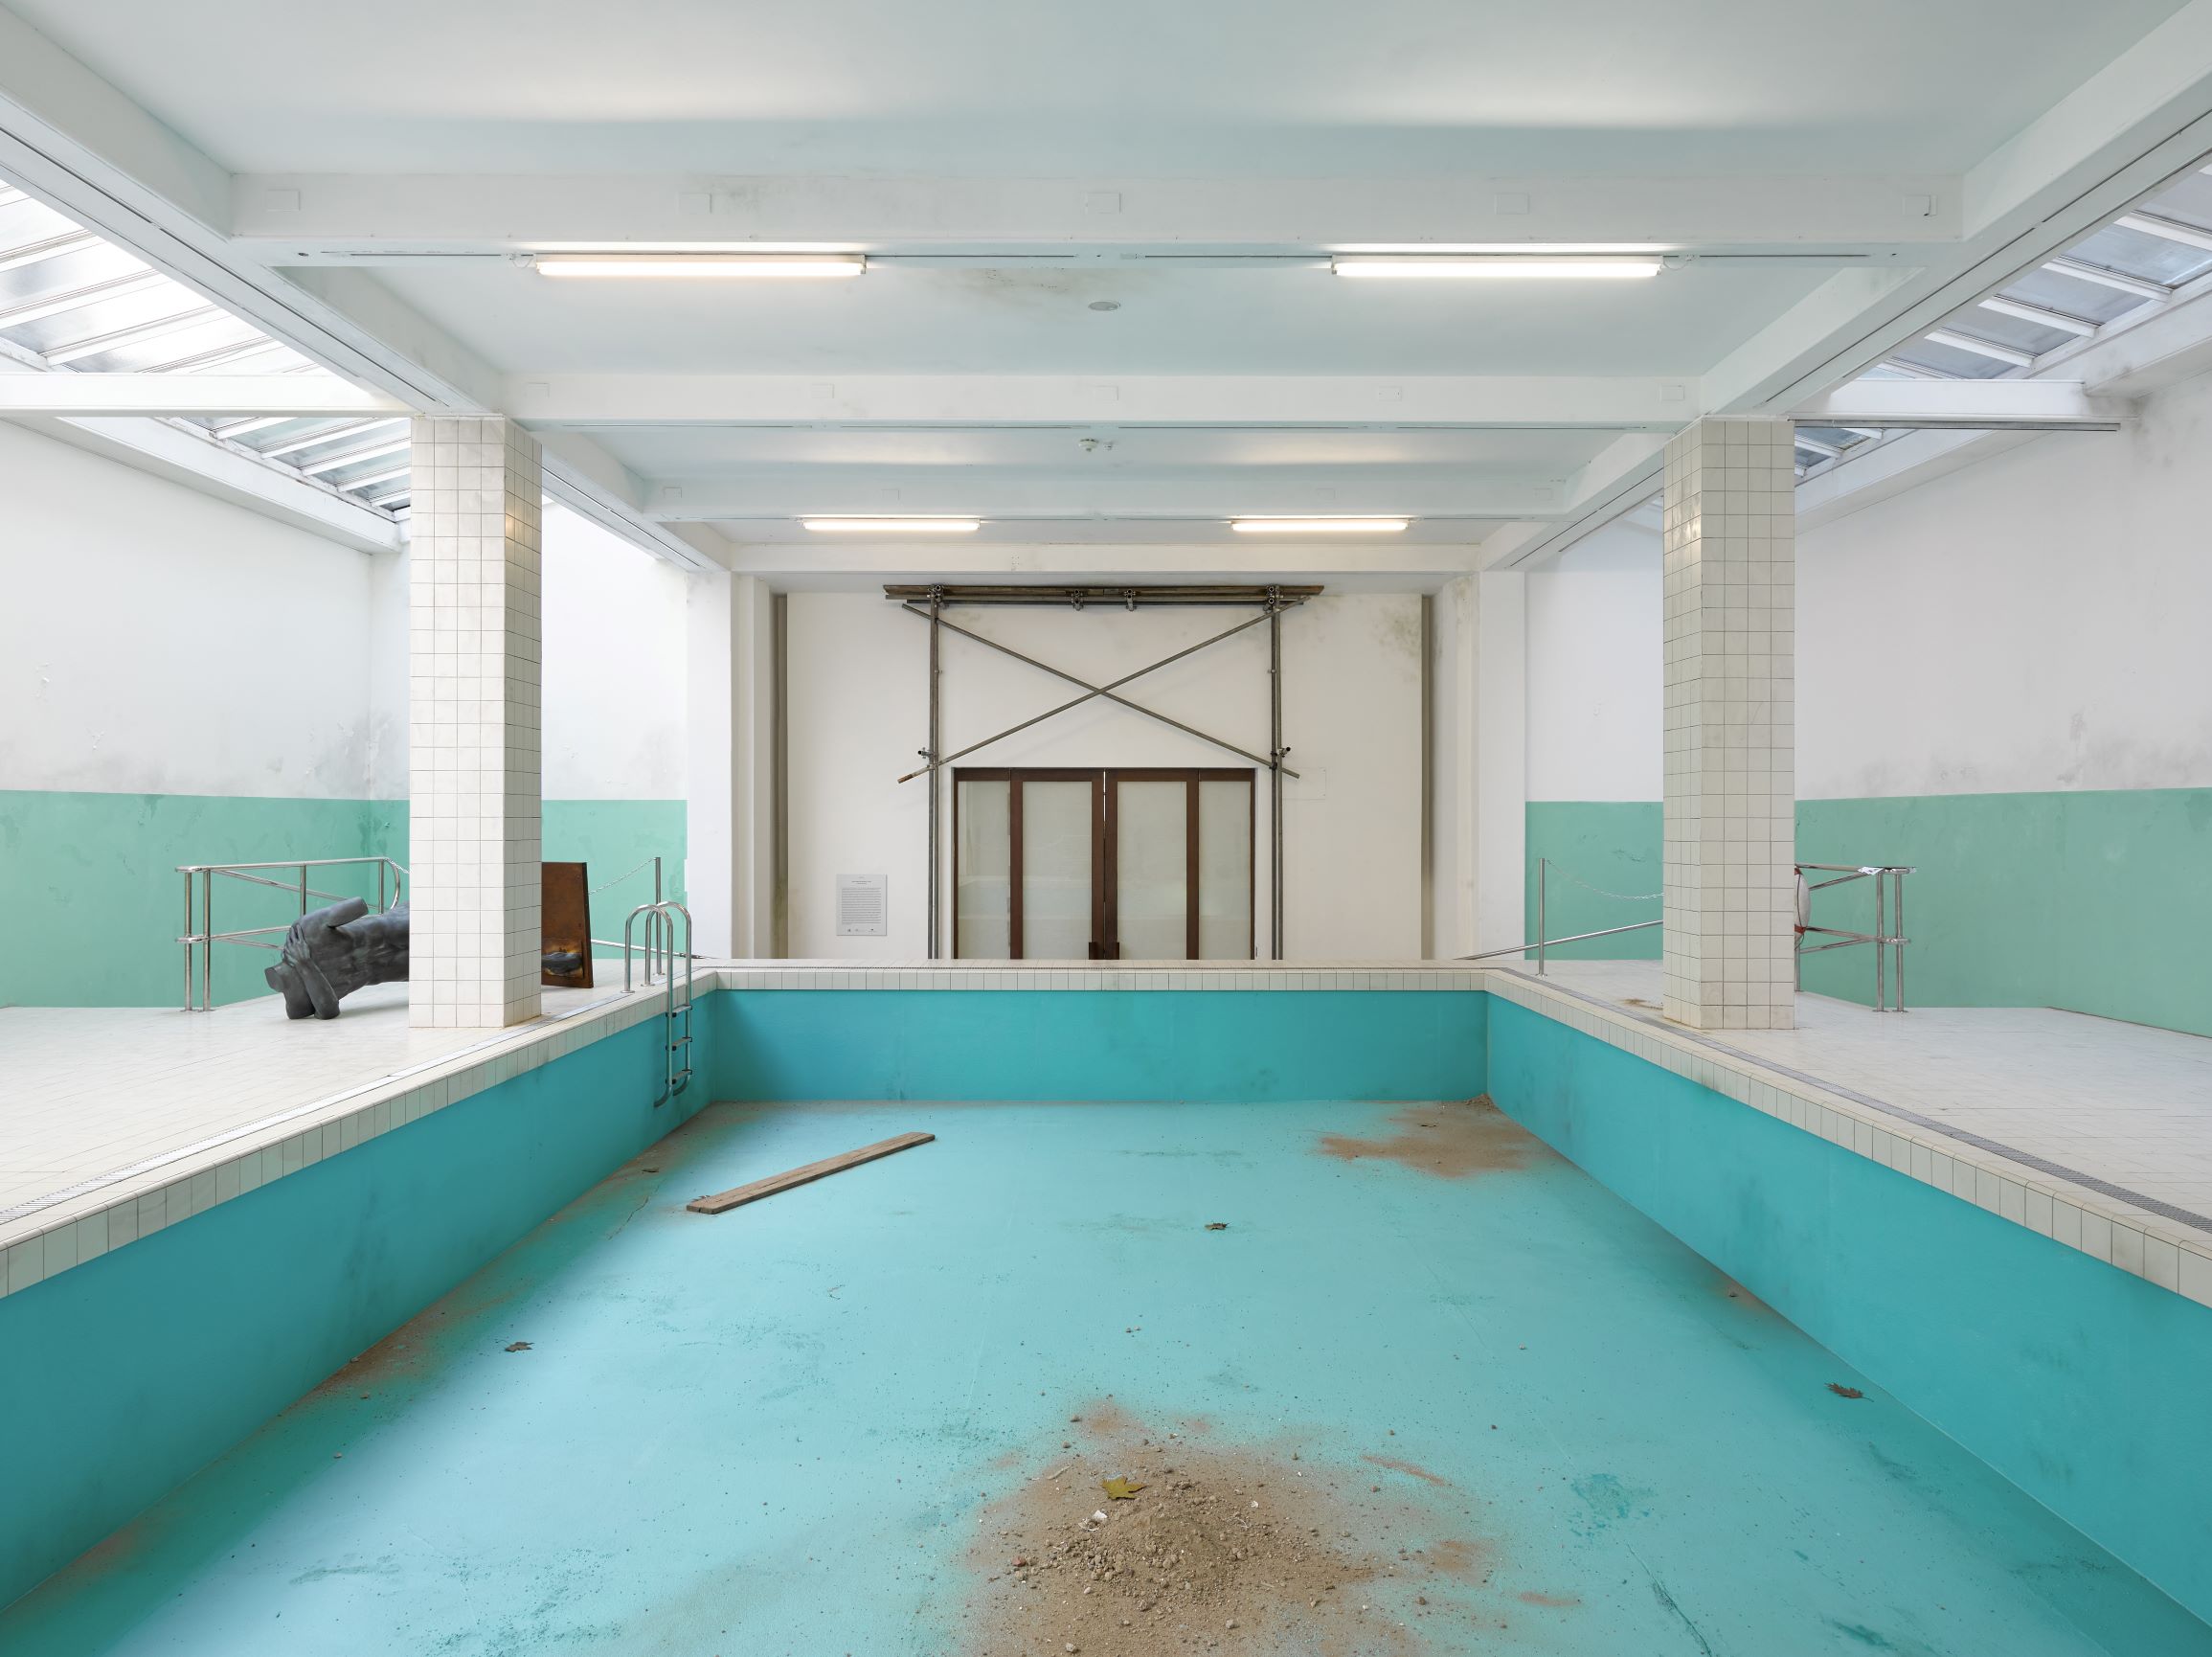 The Whitechapel Pool, 2018; wood, tiles, latex, polished stainless steel, linoleum, paint, 600 x 1450 x 2340 cm, installation view of 'This Is How We Bite Our Tongue', Whitechapel Gallery, London, 2018. Artwork © Elmgreen & Dragset 